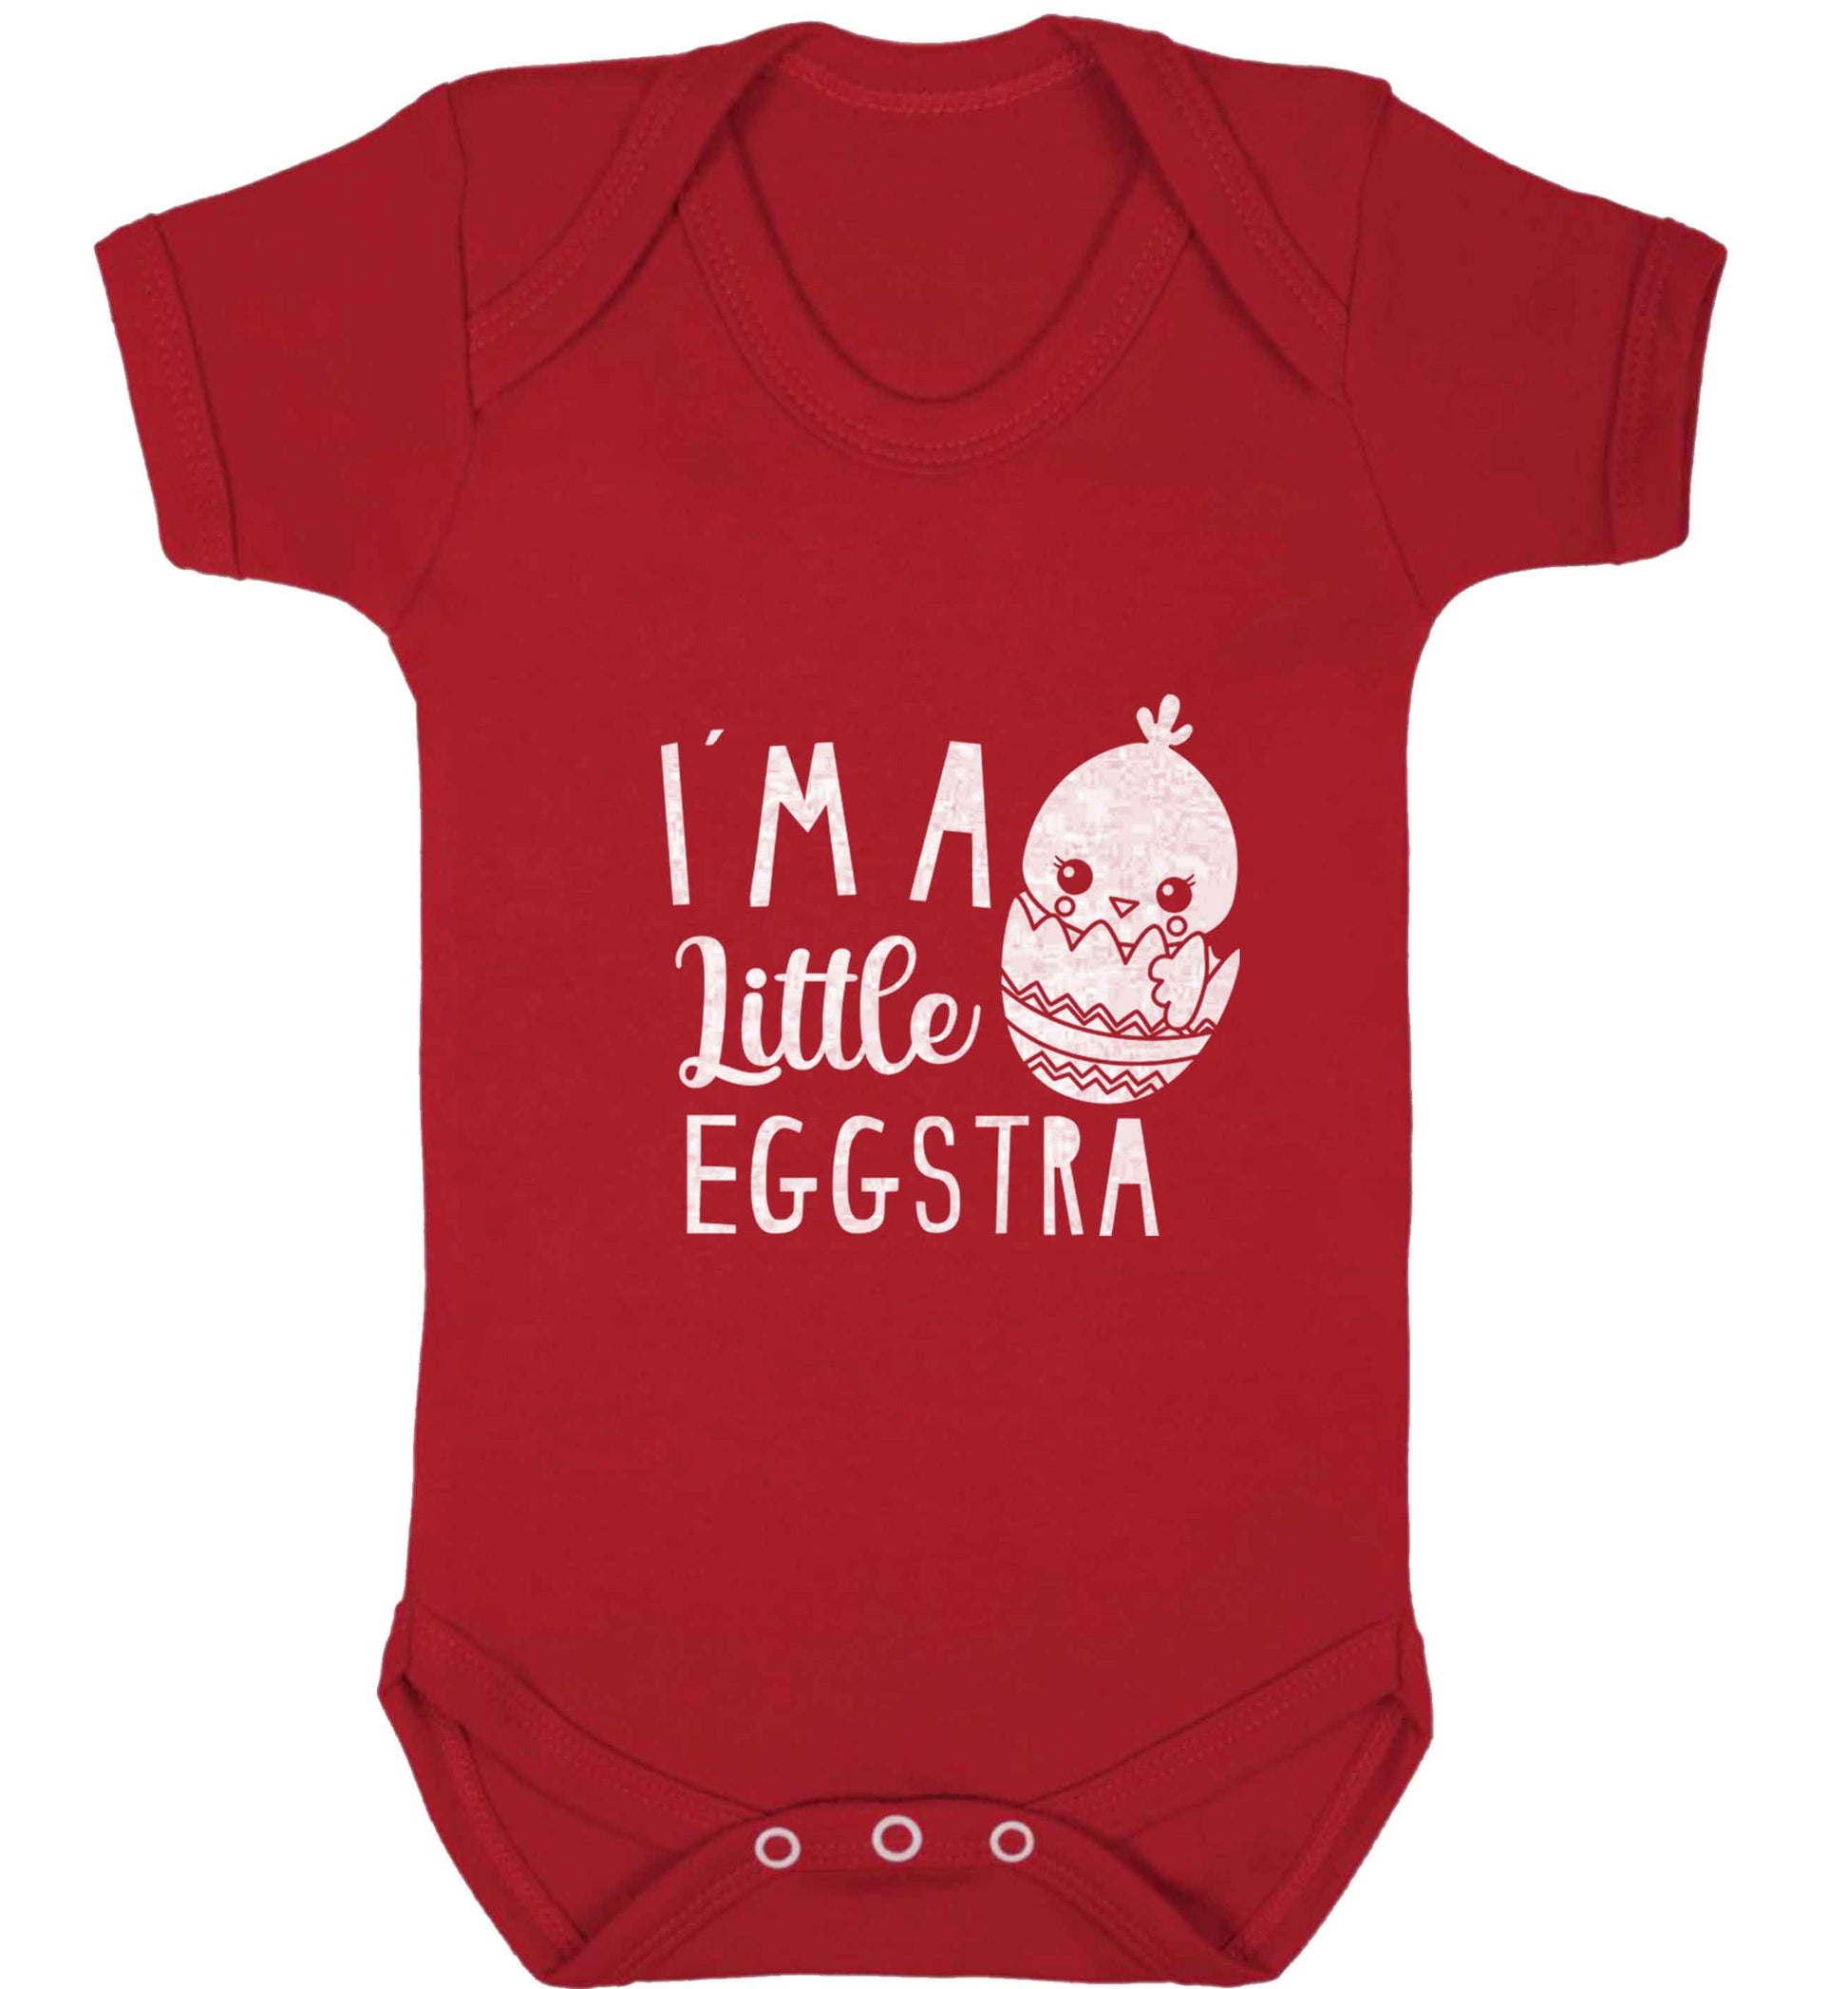 I'm a little eggstra baby vest red 18-24 months